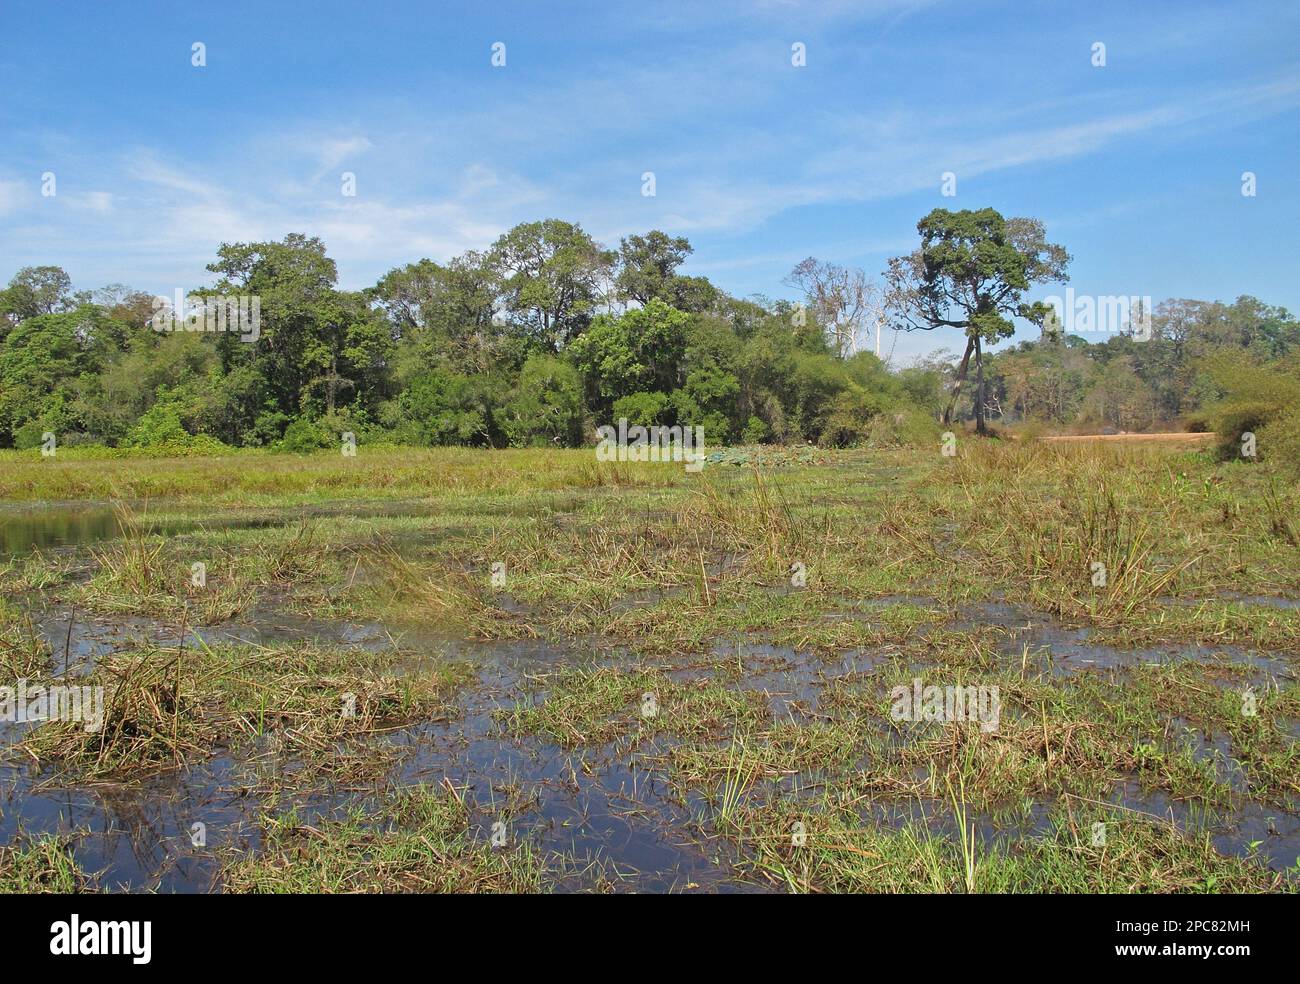 View over a wetland in open forest habitat, Tmatboey, Cambodia Stock Photo